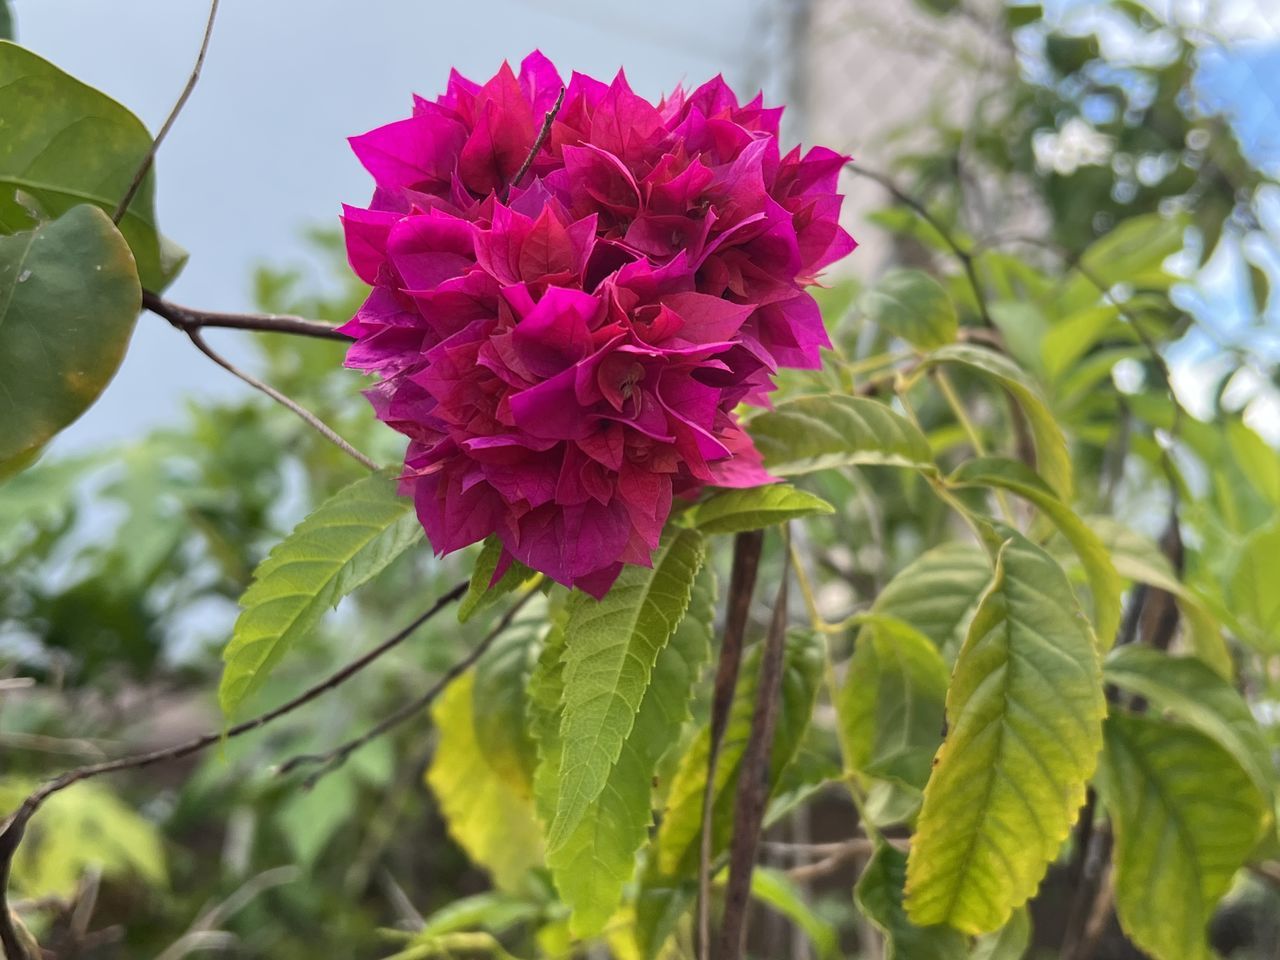 plant, flower, flowering plant, beauty in nature, plant part, leaf, freshness, nature, pink, close-up, growth, petal, blossom, fragility, inflorescence, flower head, green, shrub, no people, outdoors, focus on foreground, tree, springtime, botany, food and drink, day, magenta, summer